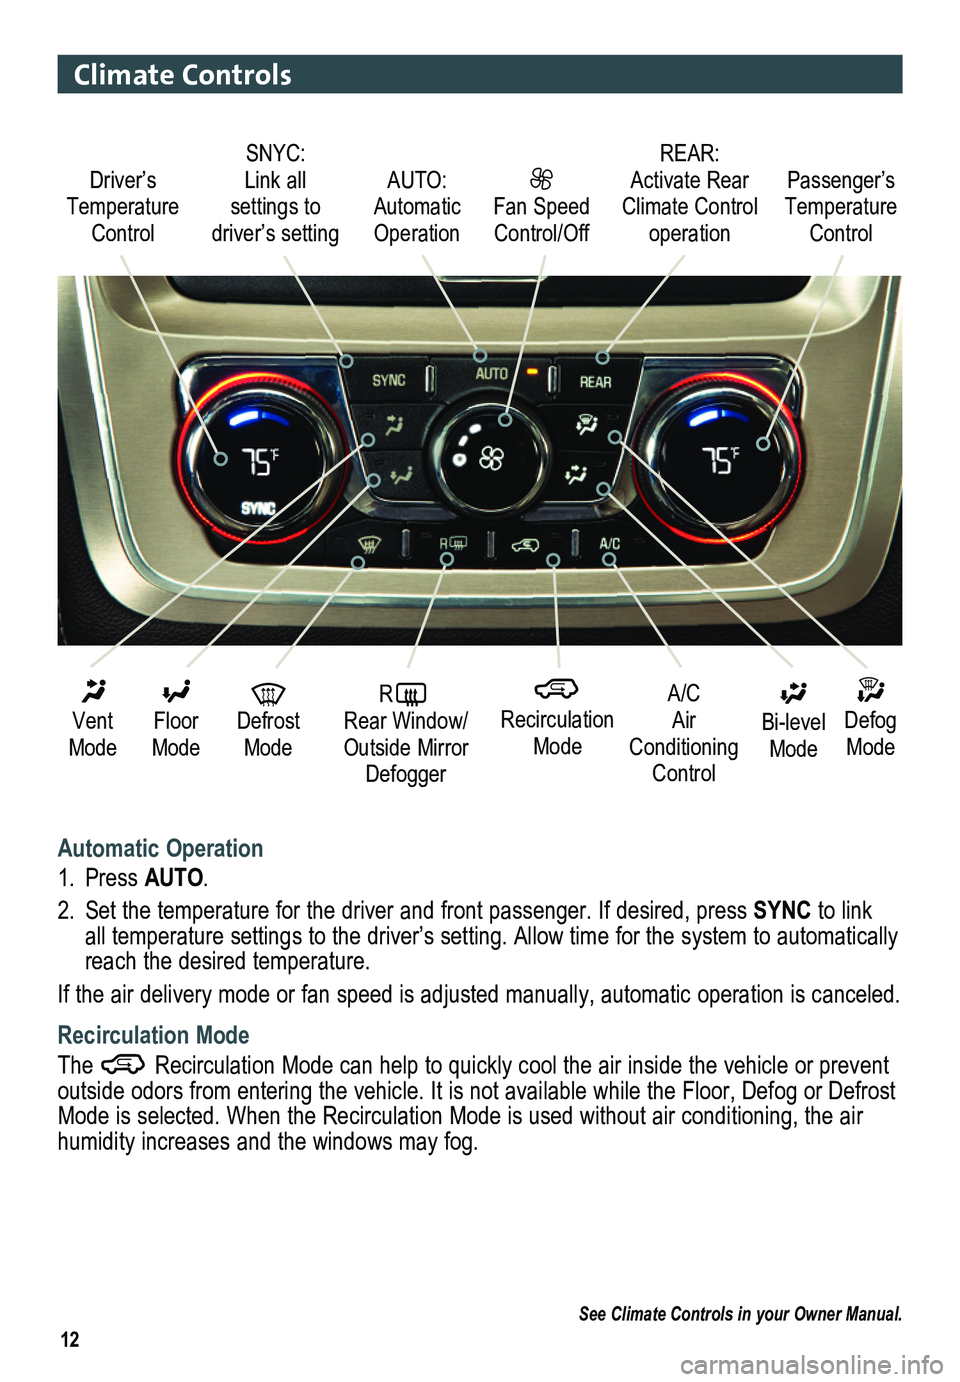 GMC ACADIA 2014  Get To Know Guide 12
Climate Controls
Automatic Operation
1. Press AUTO.
2. Set the temperature for the driver and front passenger. If desired, pres\
s SYNC to link all temperature settings to the driver’s setting. A